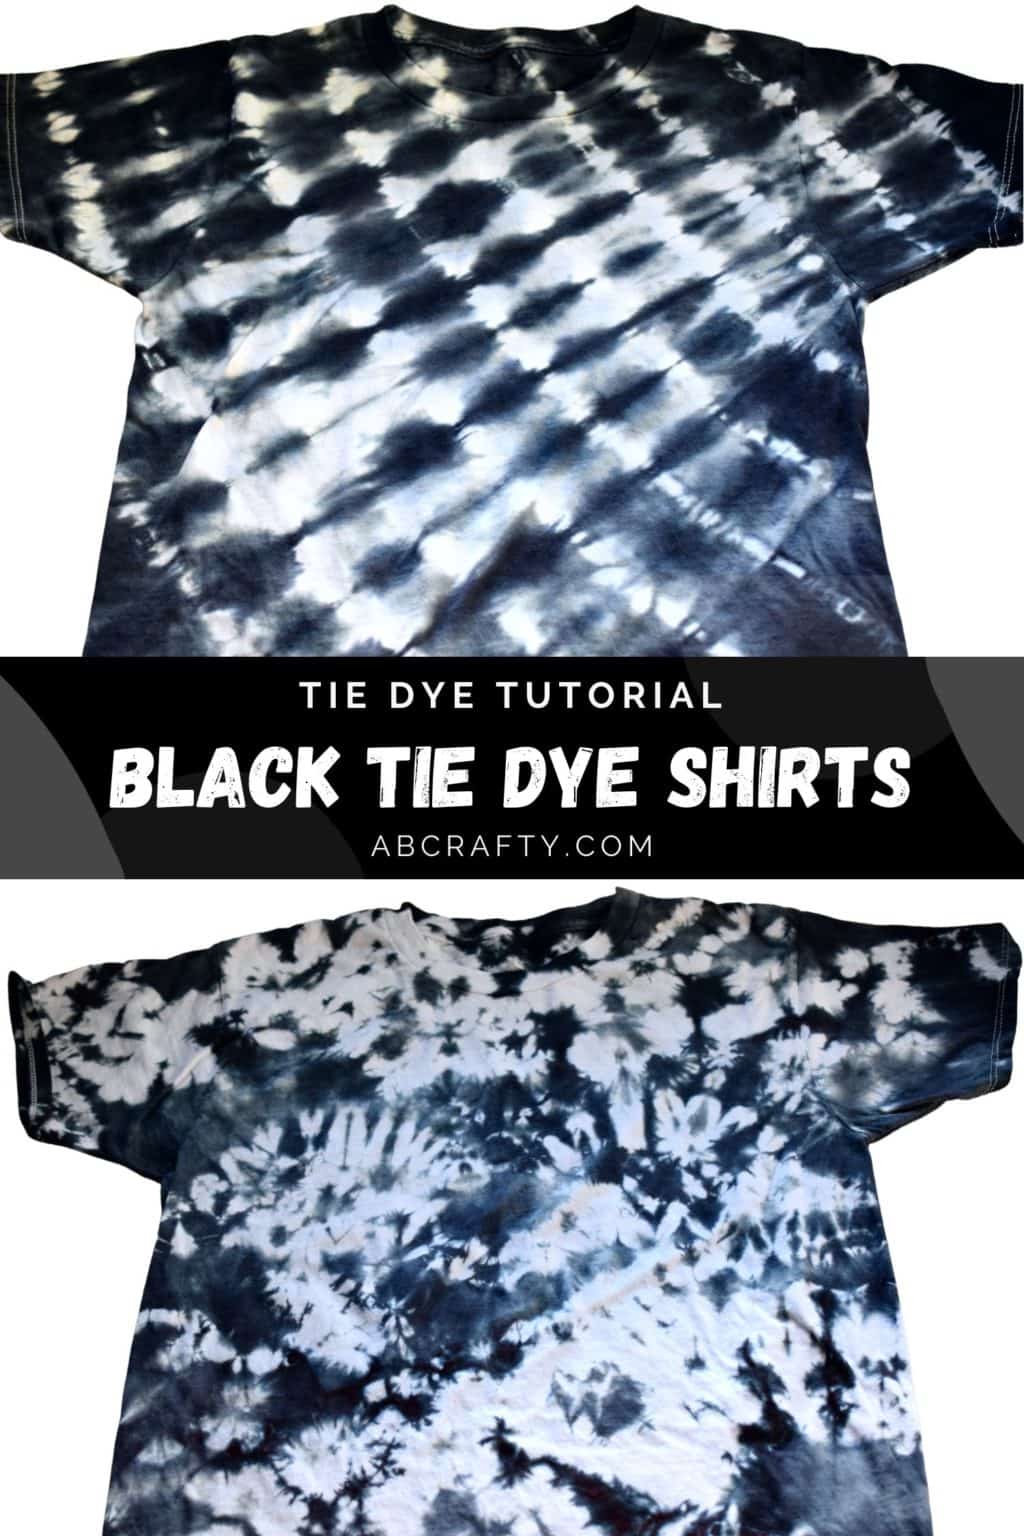 two tie dye shirts with the first a diagonal striped black tie dye shirt and the bottom a crumple dye shirt with the title "tie dye tutorial - black tie dye shirts, abcrafty.com"